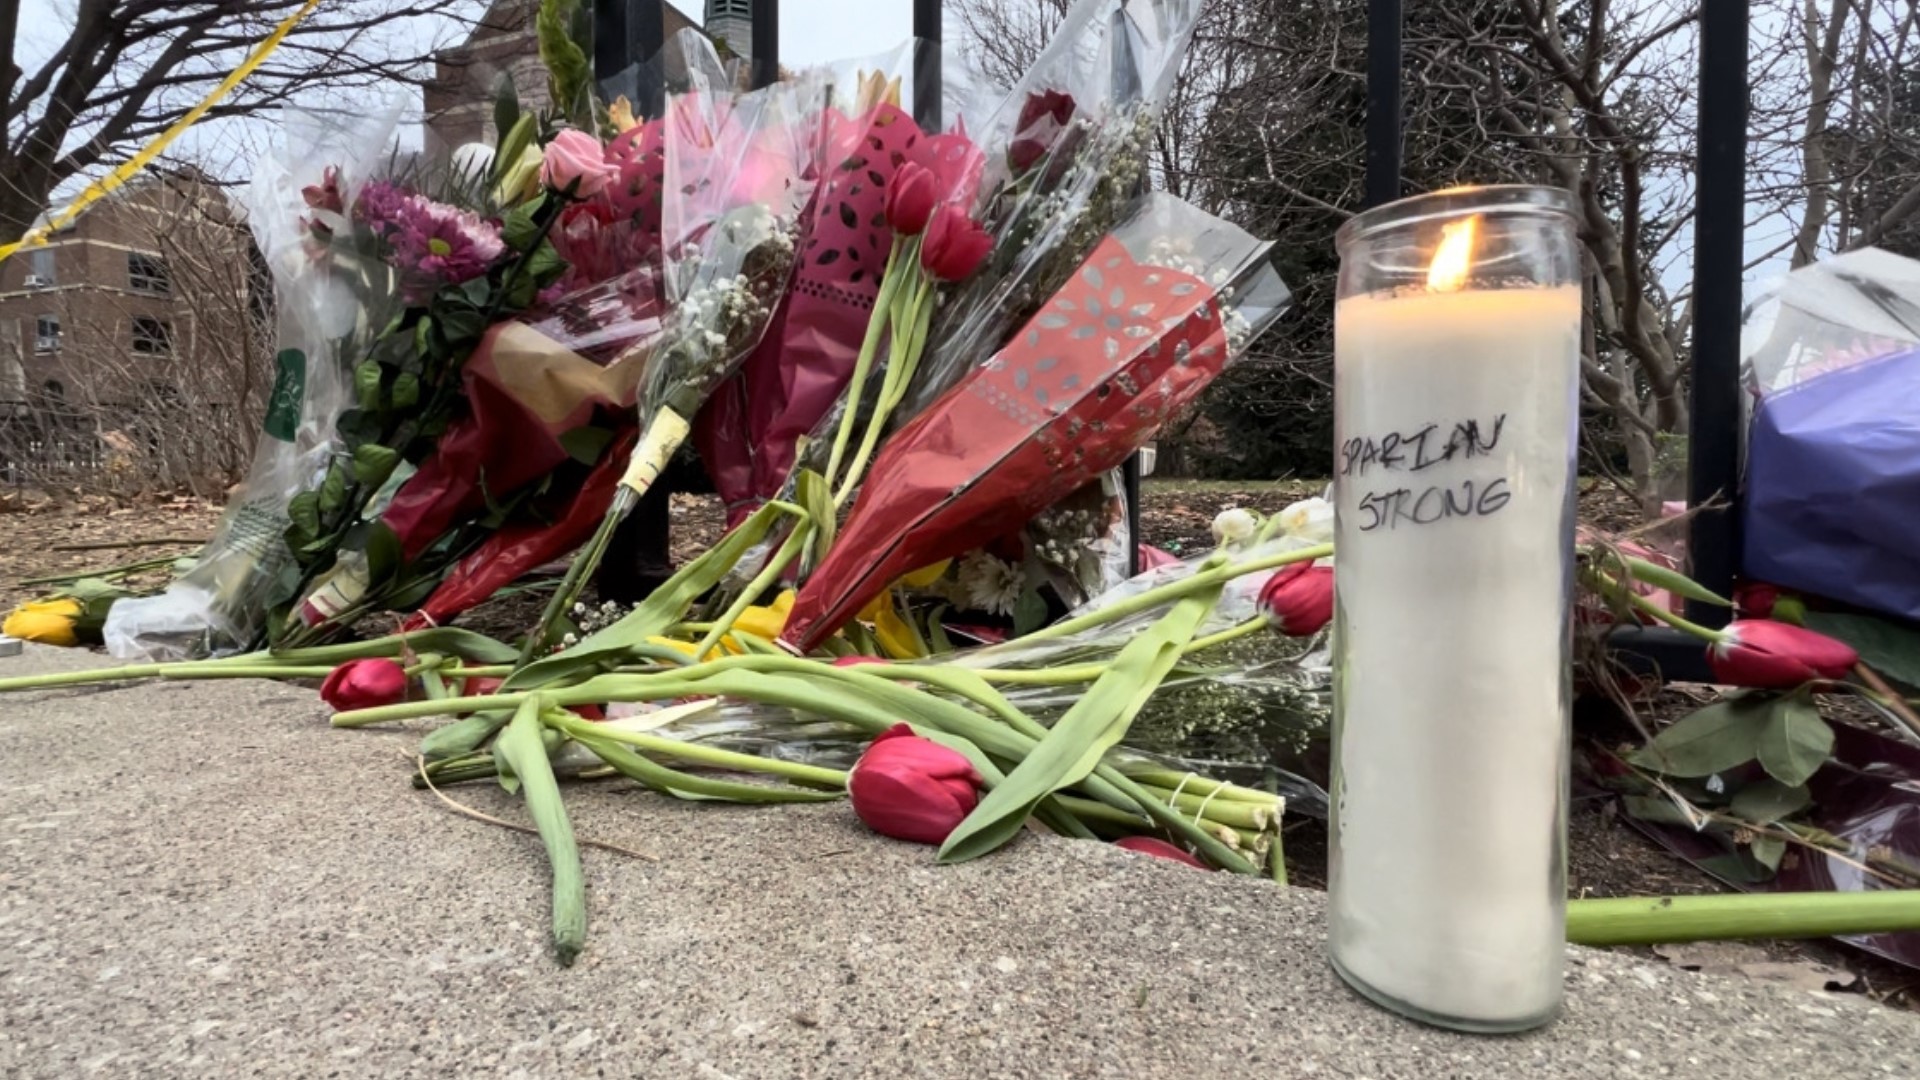 Communities across Michigan will hold vigils this week to help uplift those impacted by the shooting.